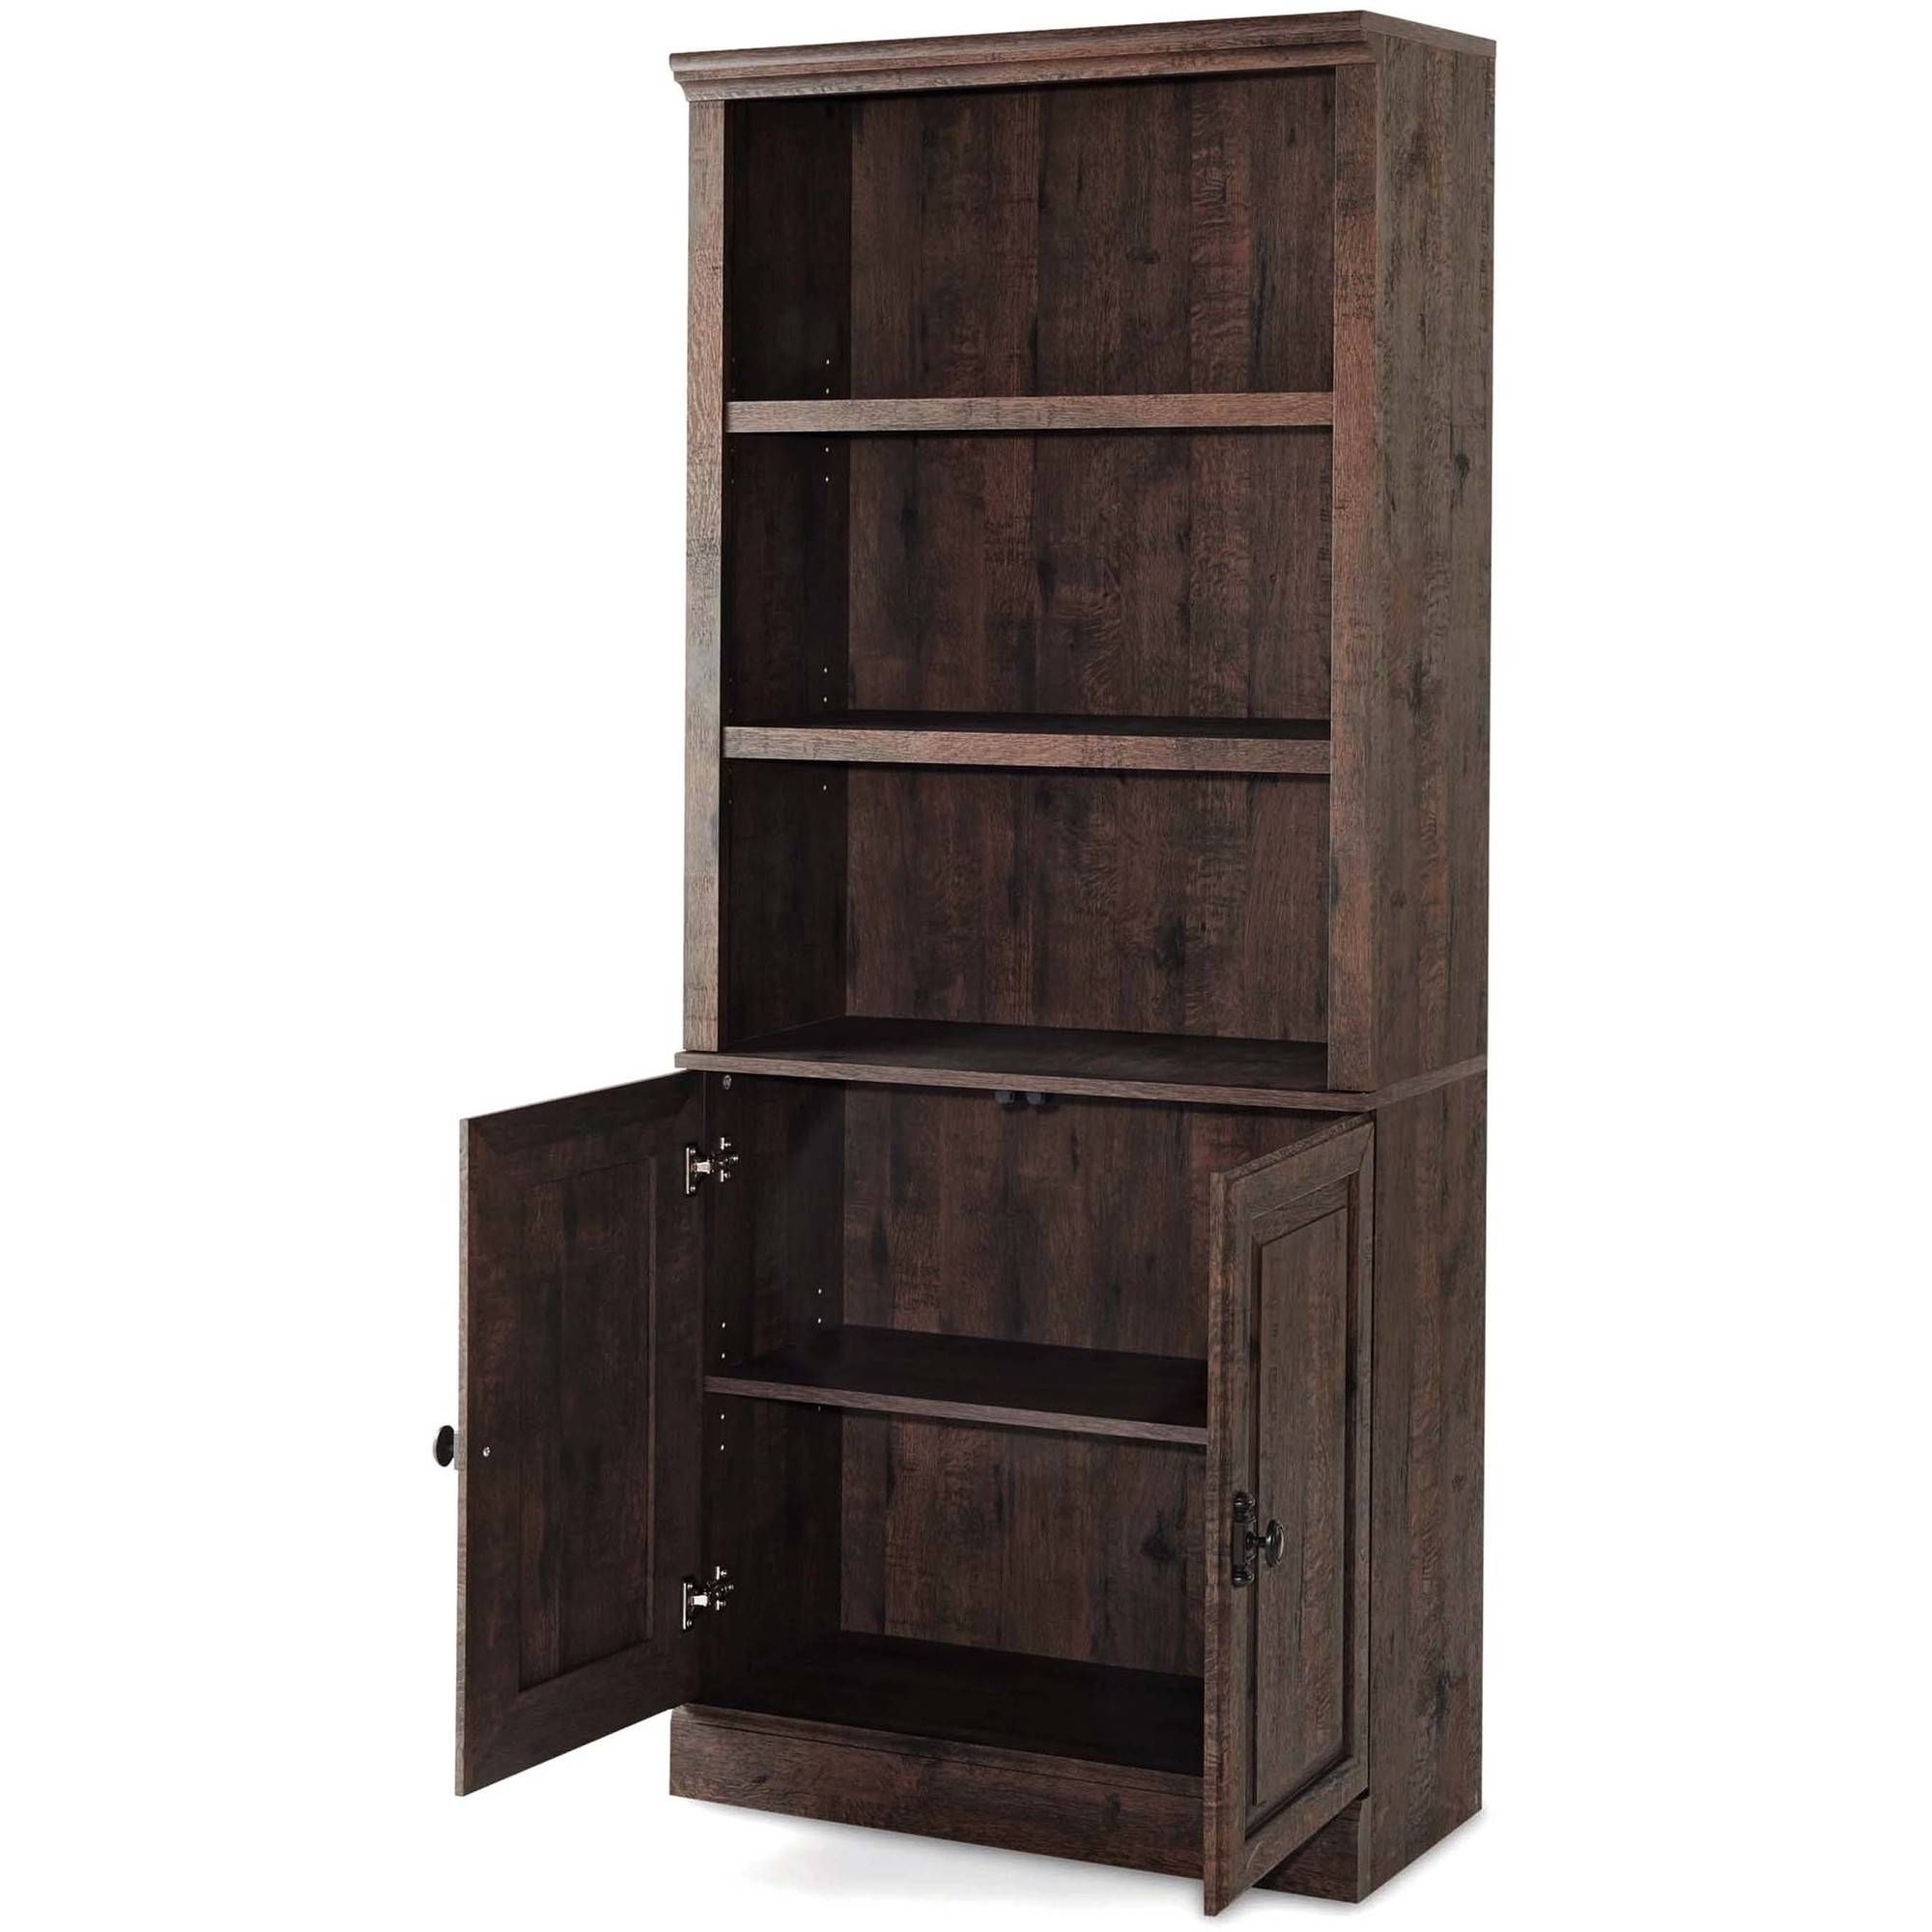 Widely Used Better Homes And Gardens Crossmill Bookcase With Doors, Set Of 2 In Bookcases With Doors (View 6 of 15)